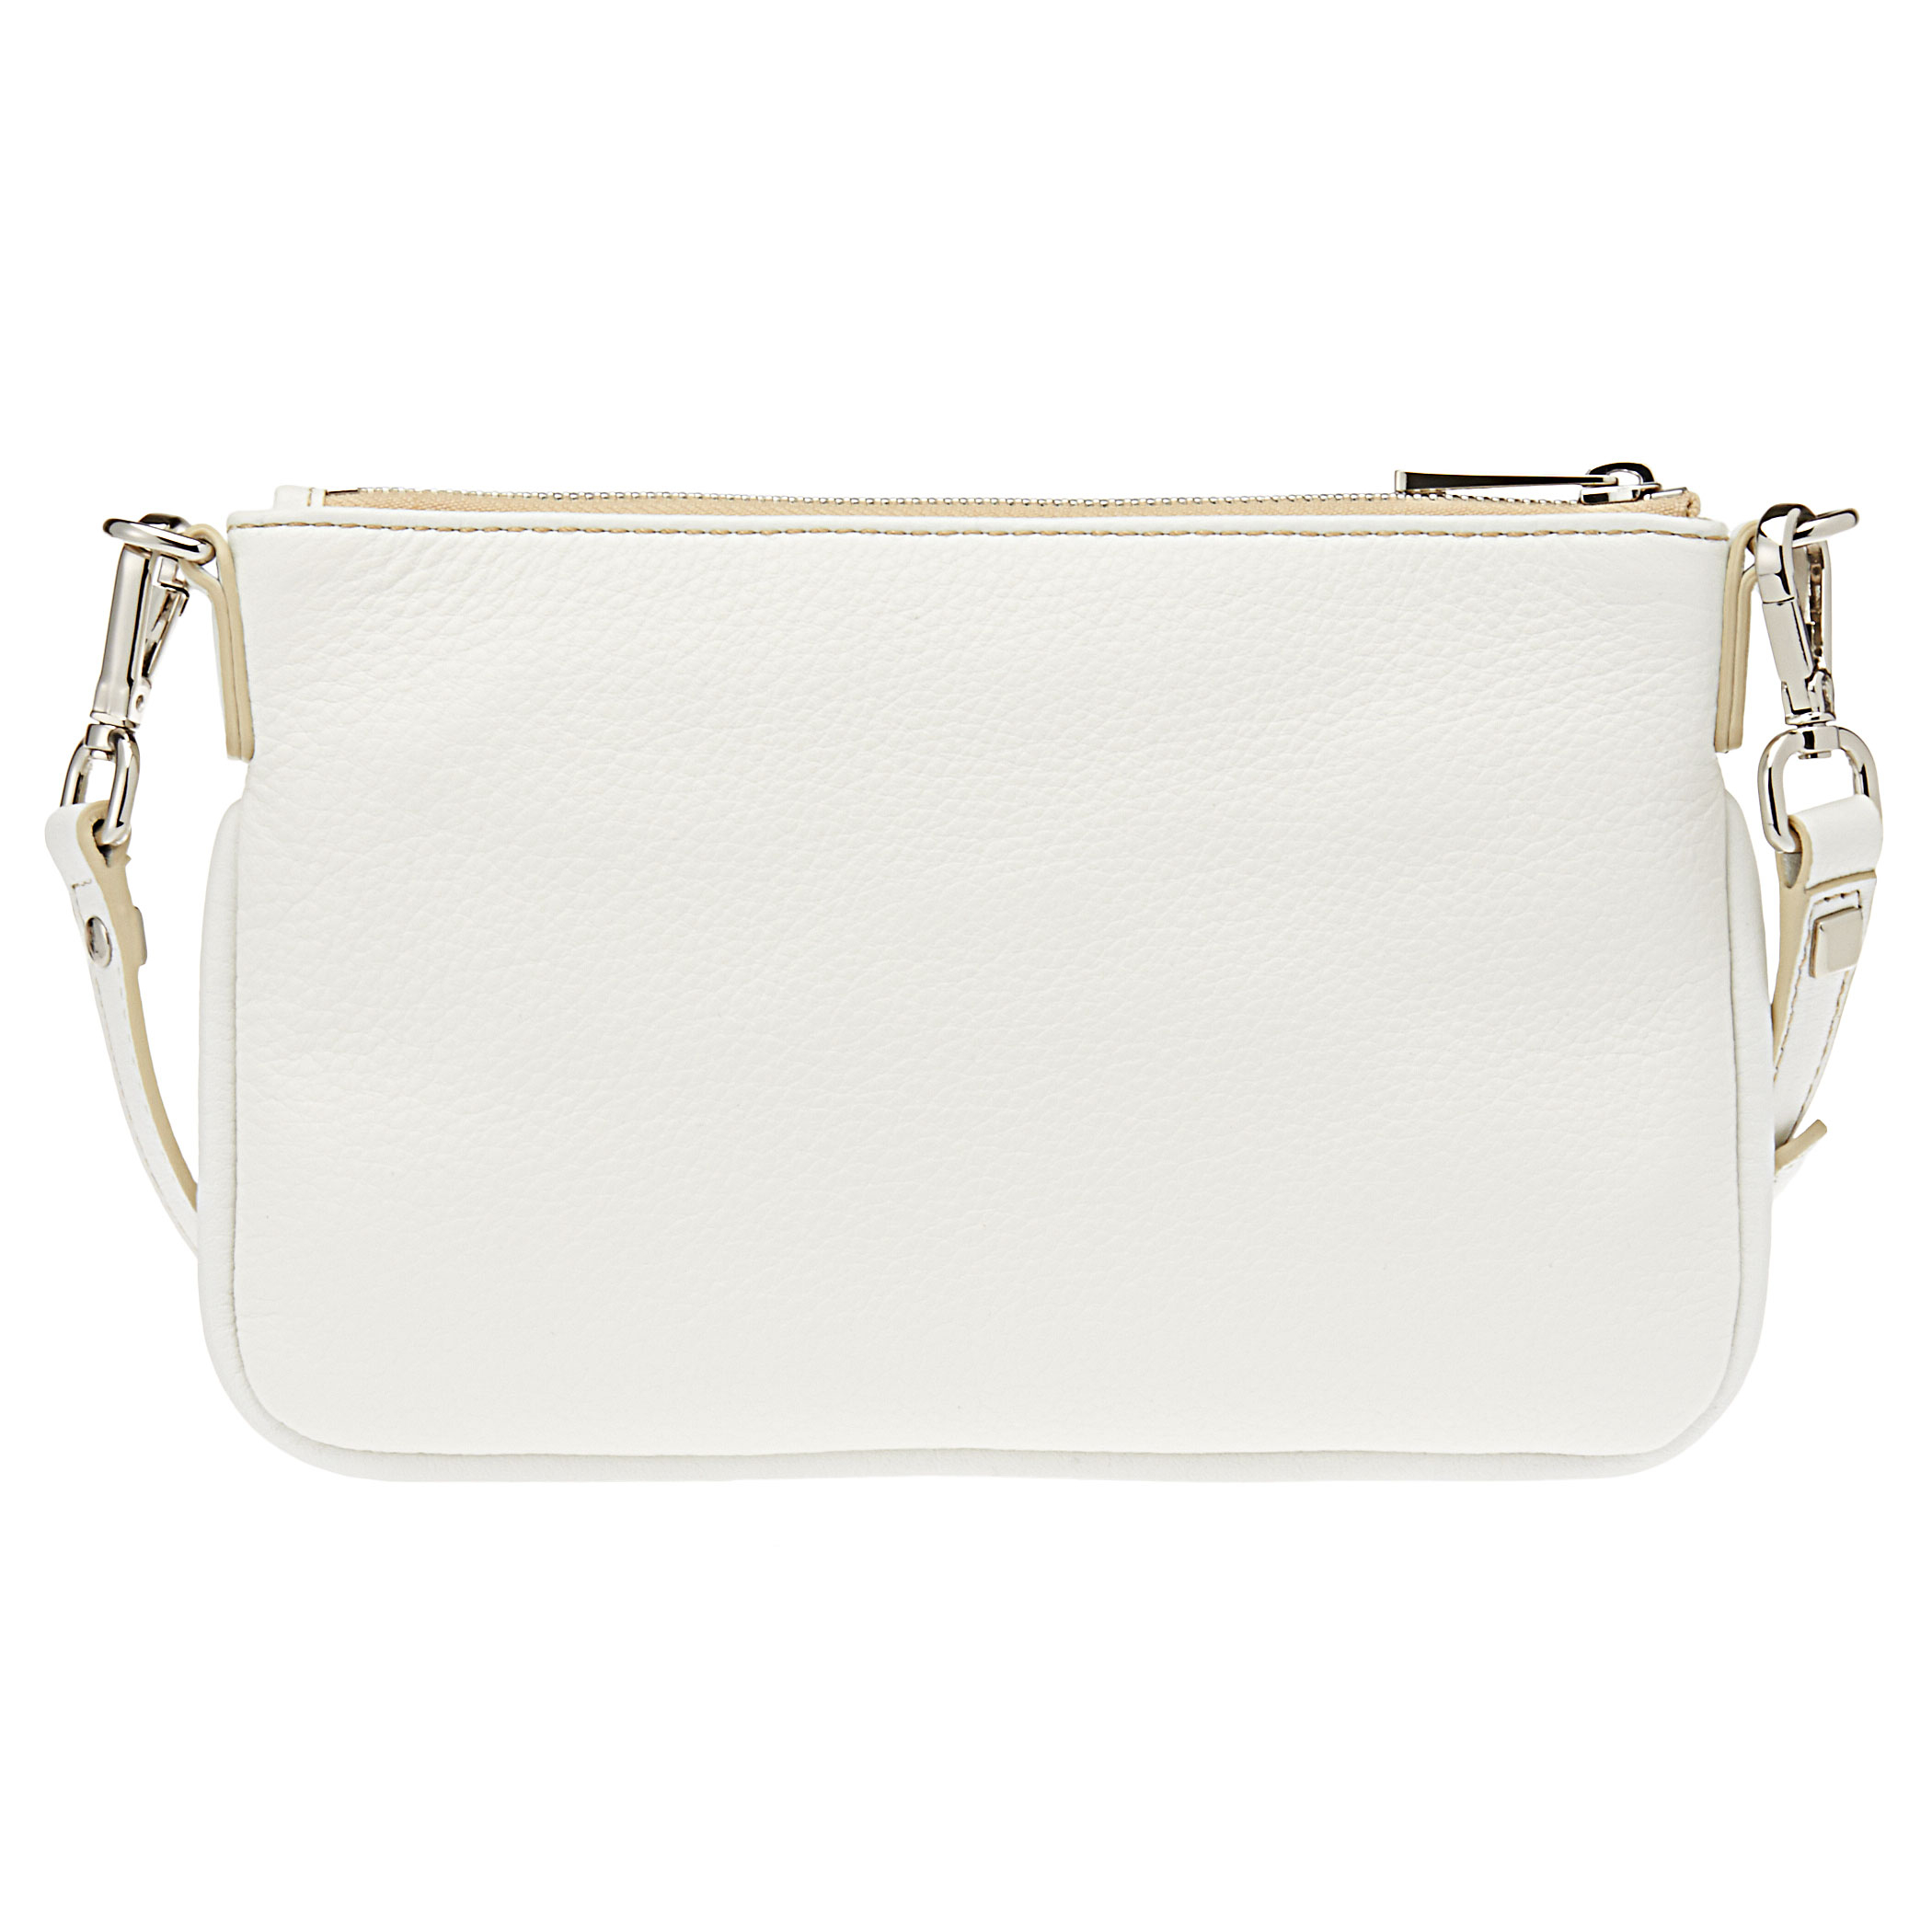 Nine West Hudson Pebbled Leather Crossbody Bag in White Leather (White) - Lyst